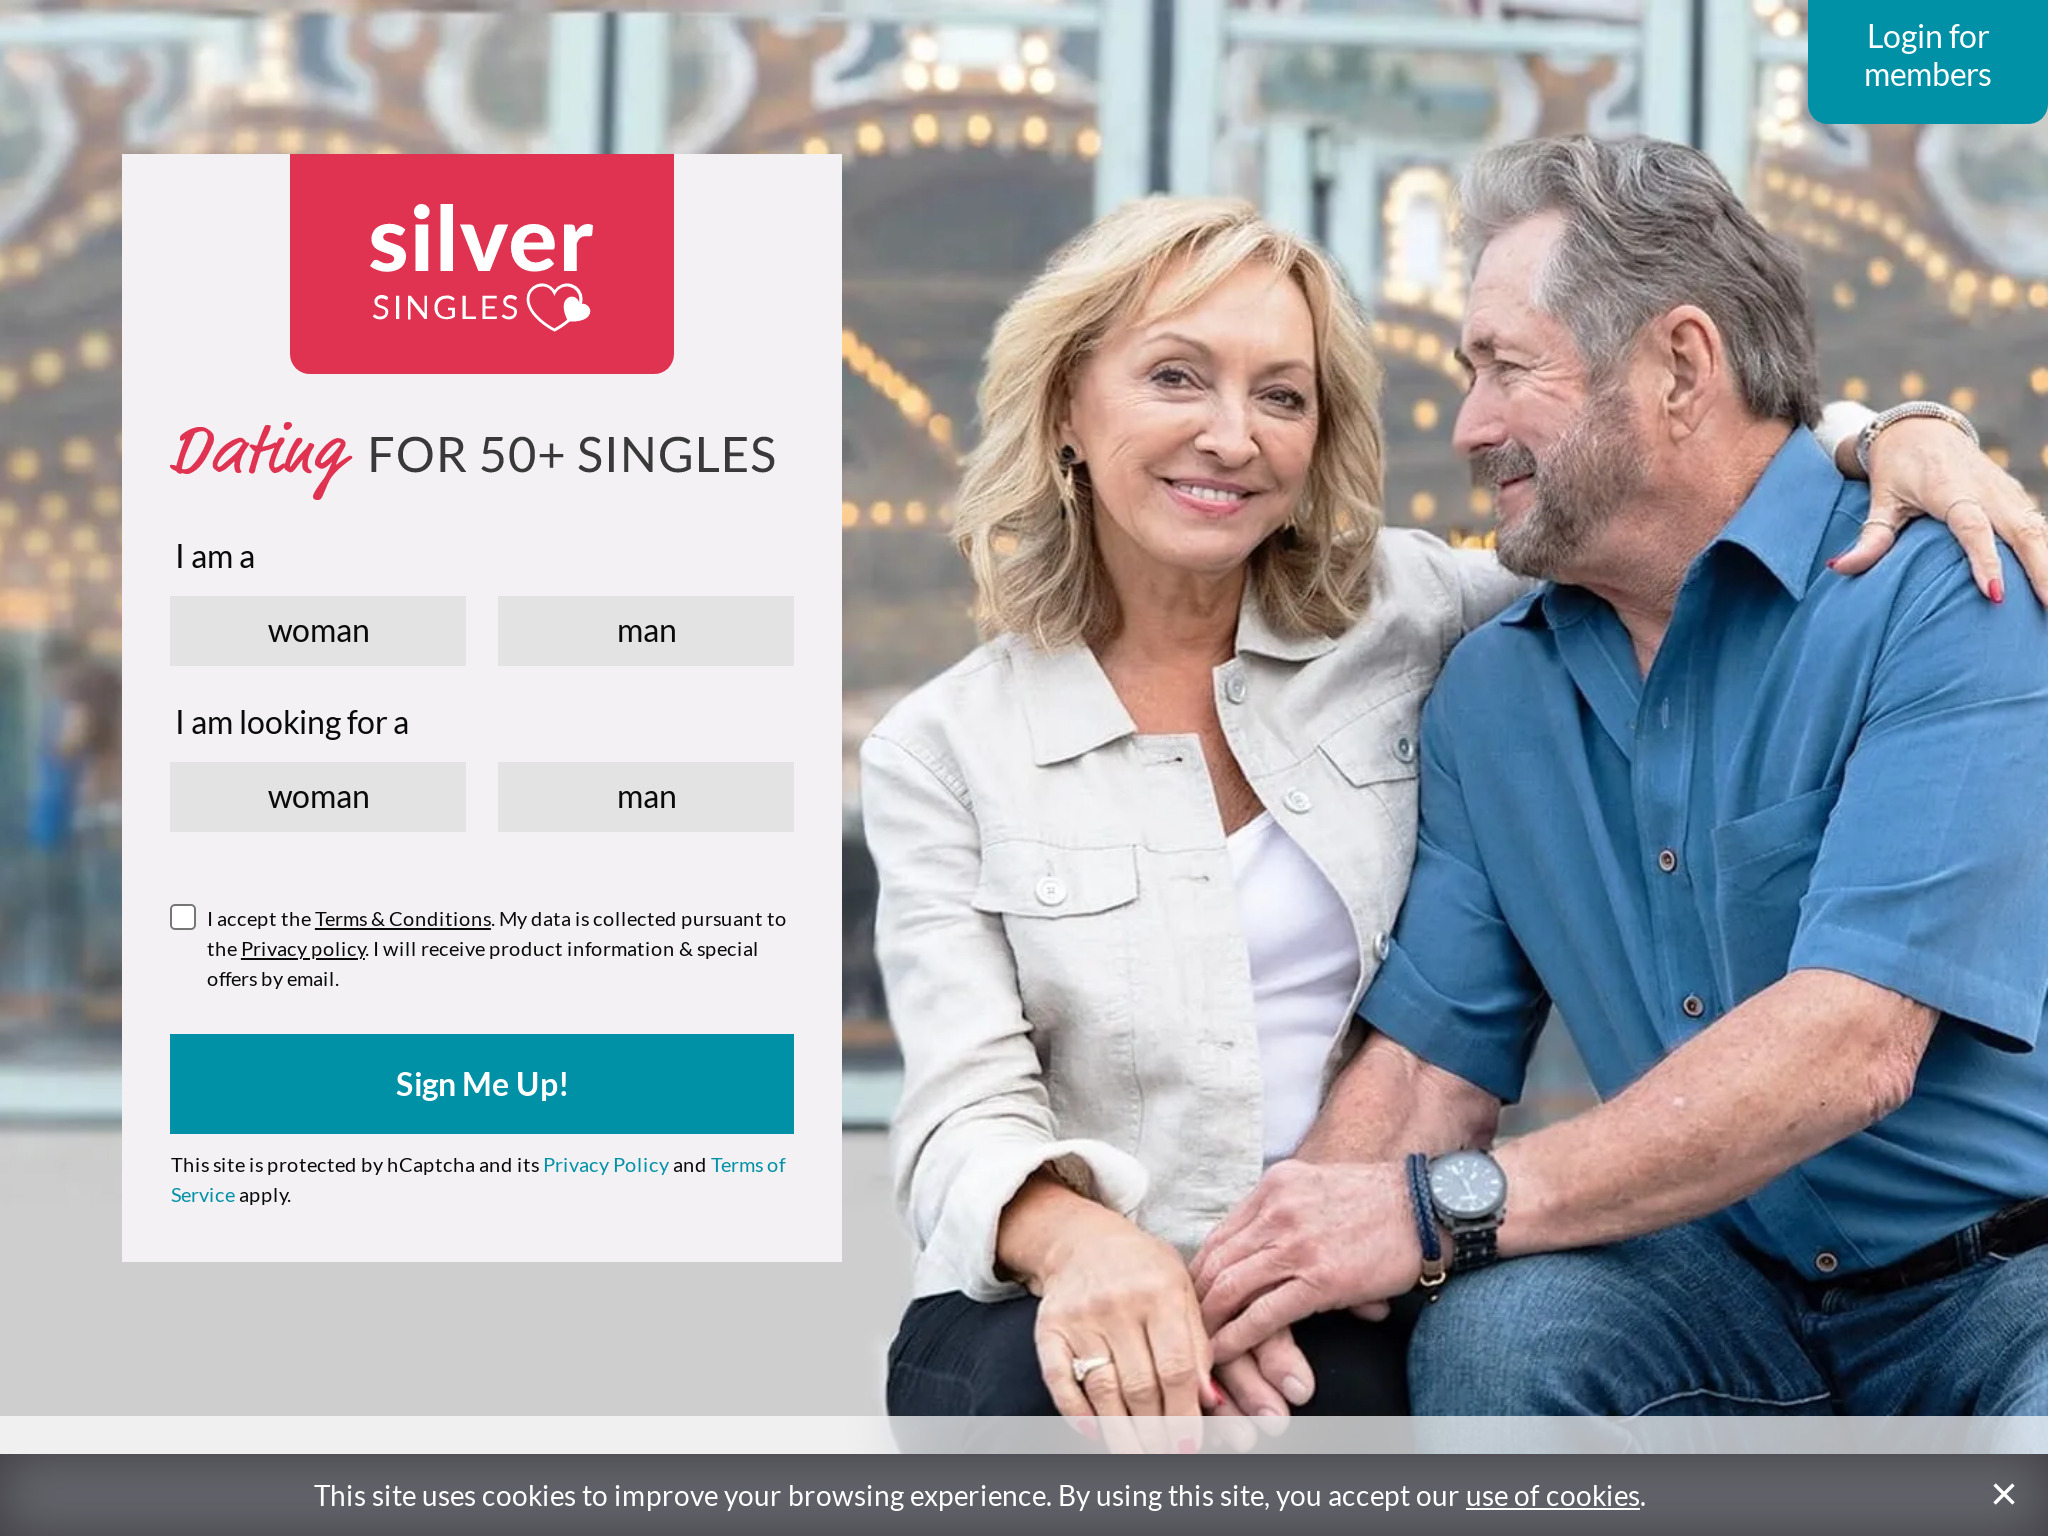 SilverSingles Review 2023 – Pros, Cons, and Everything In Between